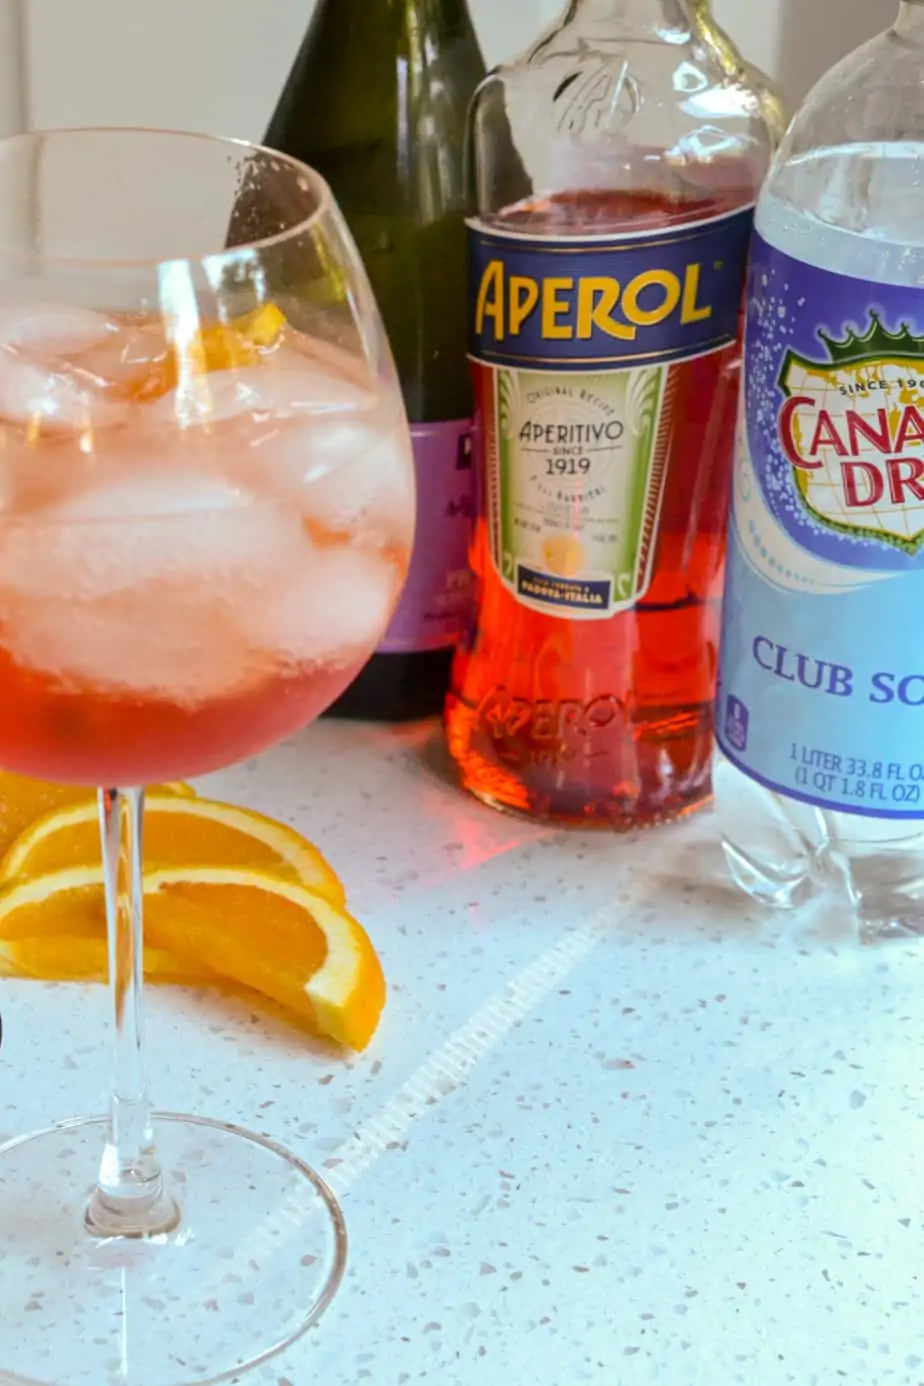 The ingredients for Aperol spritz are prosecco, Aperol, and club soda. 